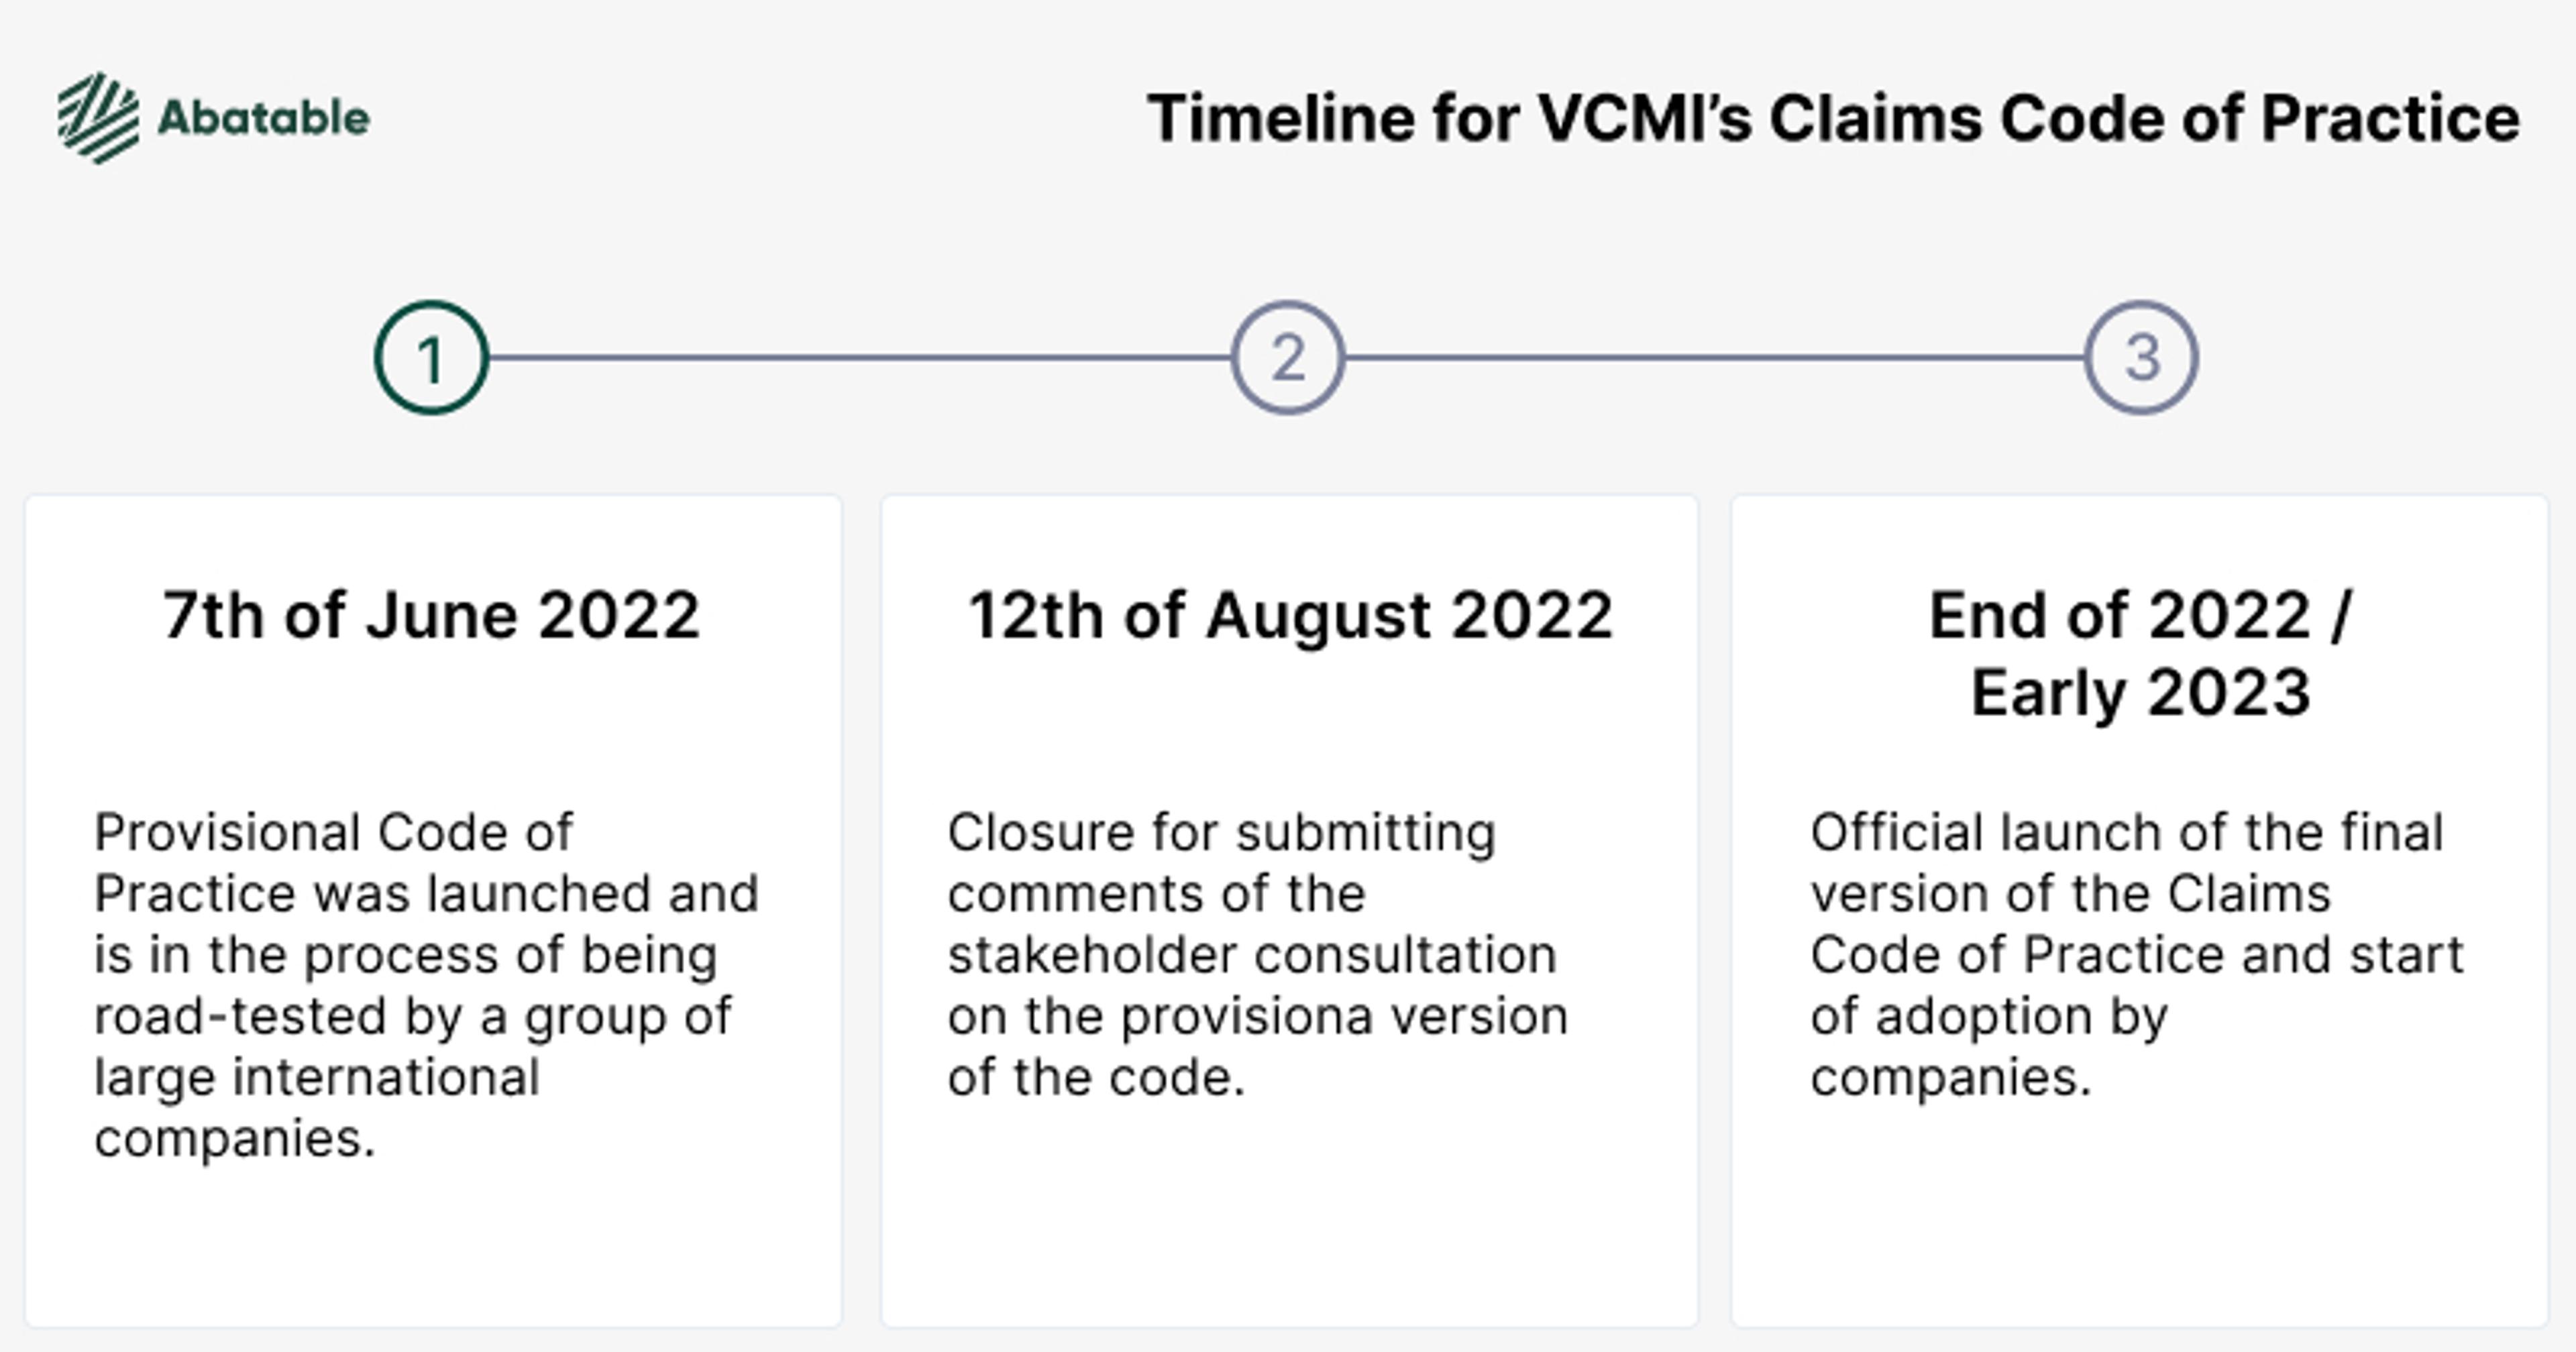 VCMI Timeline of next steps for the Claims Code of Practice